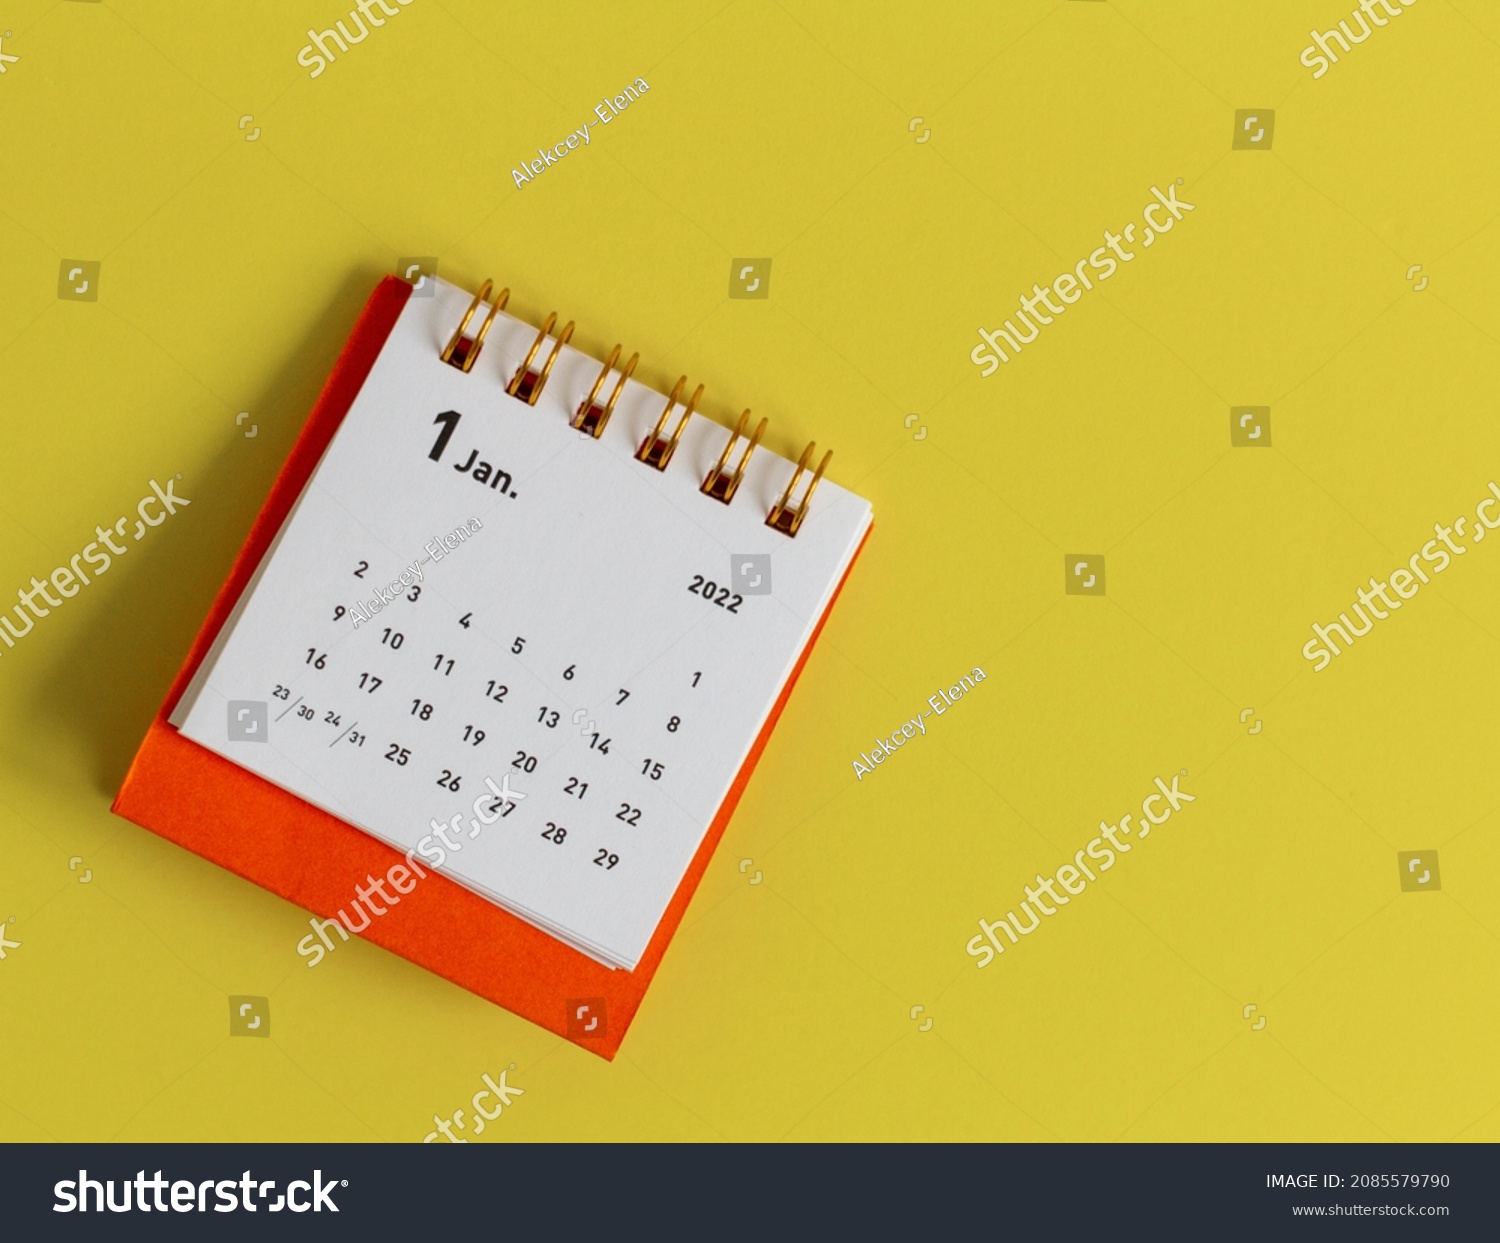 Desktop calendar for January 2022 on a yellow background. #2085579790